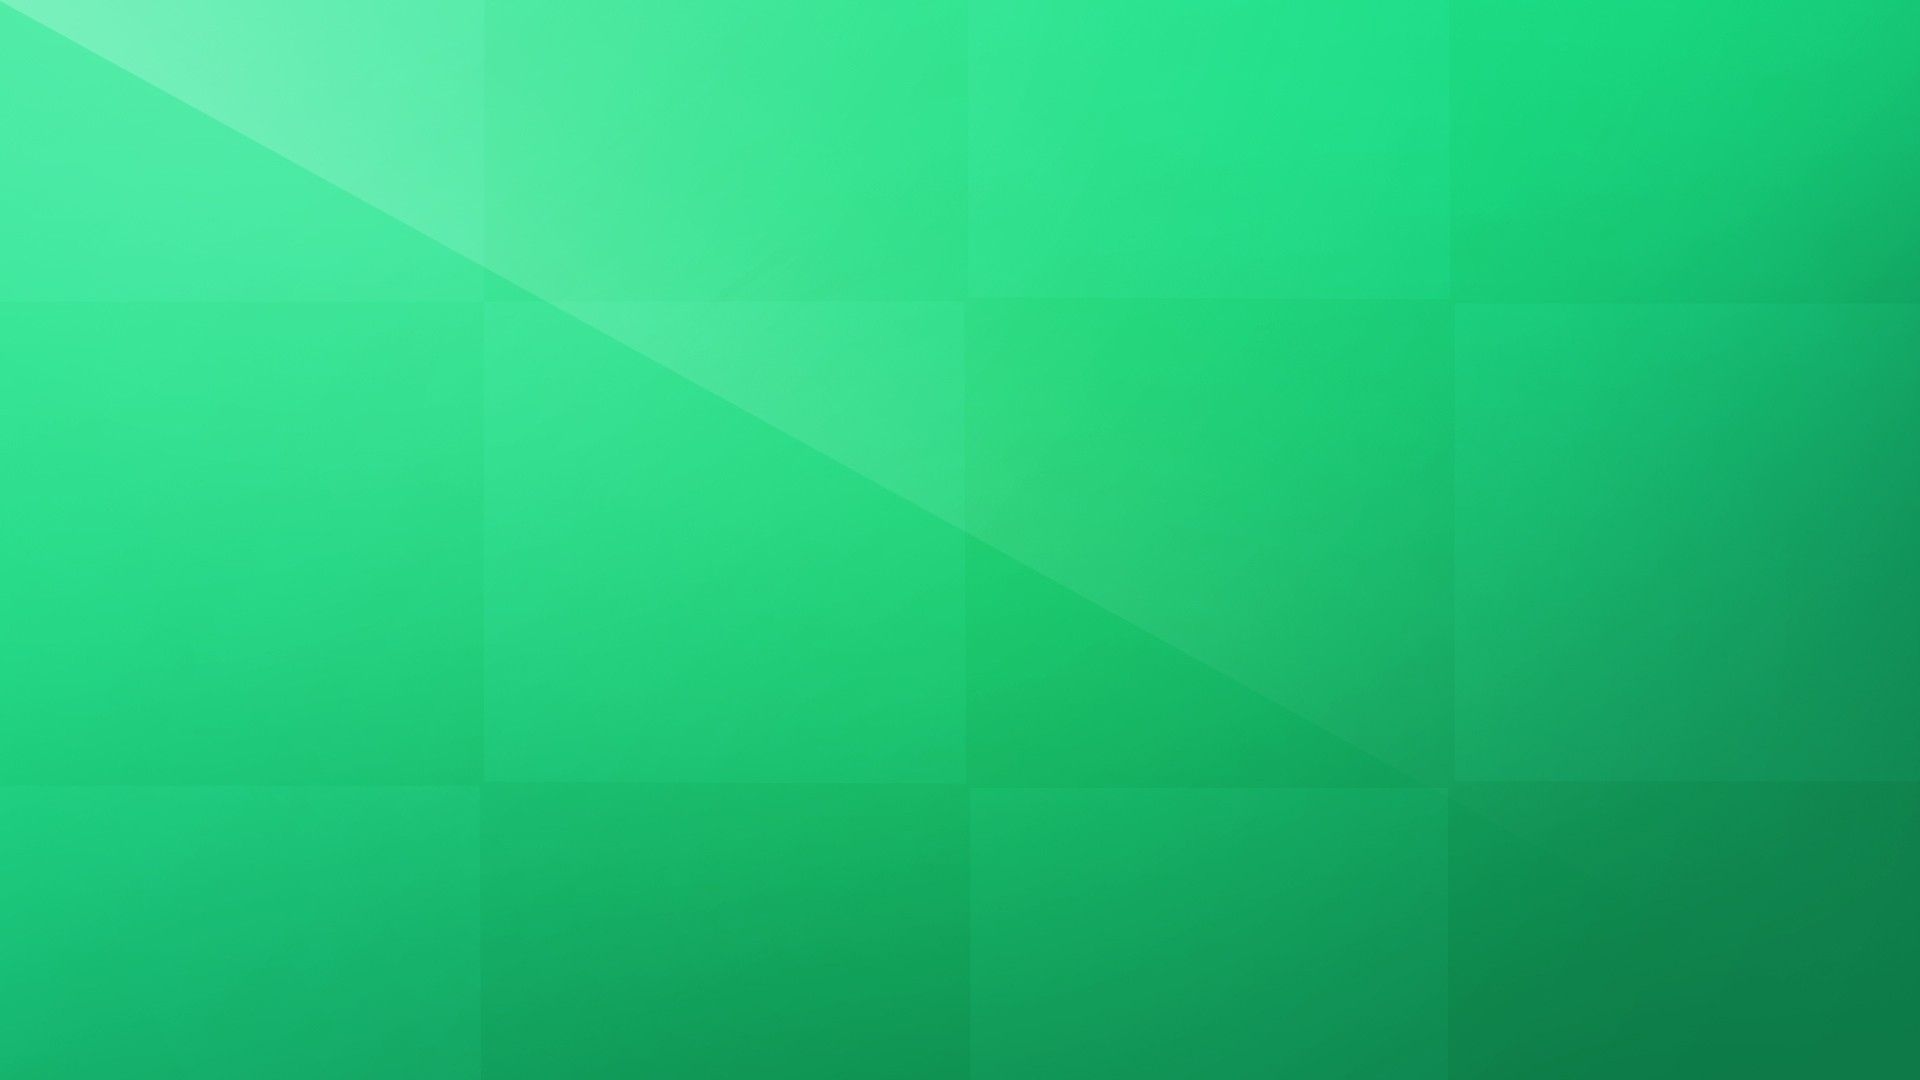 Green Background Images  Free iPhone  Zoom HD Wallpapers  Vectors   rawpixel